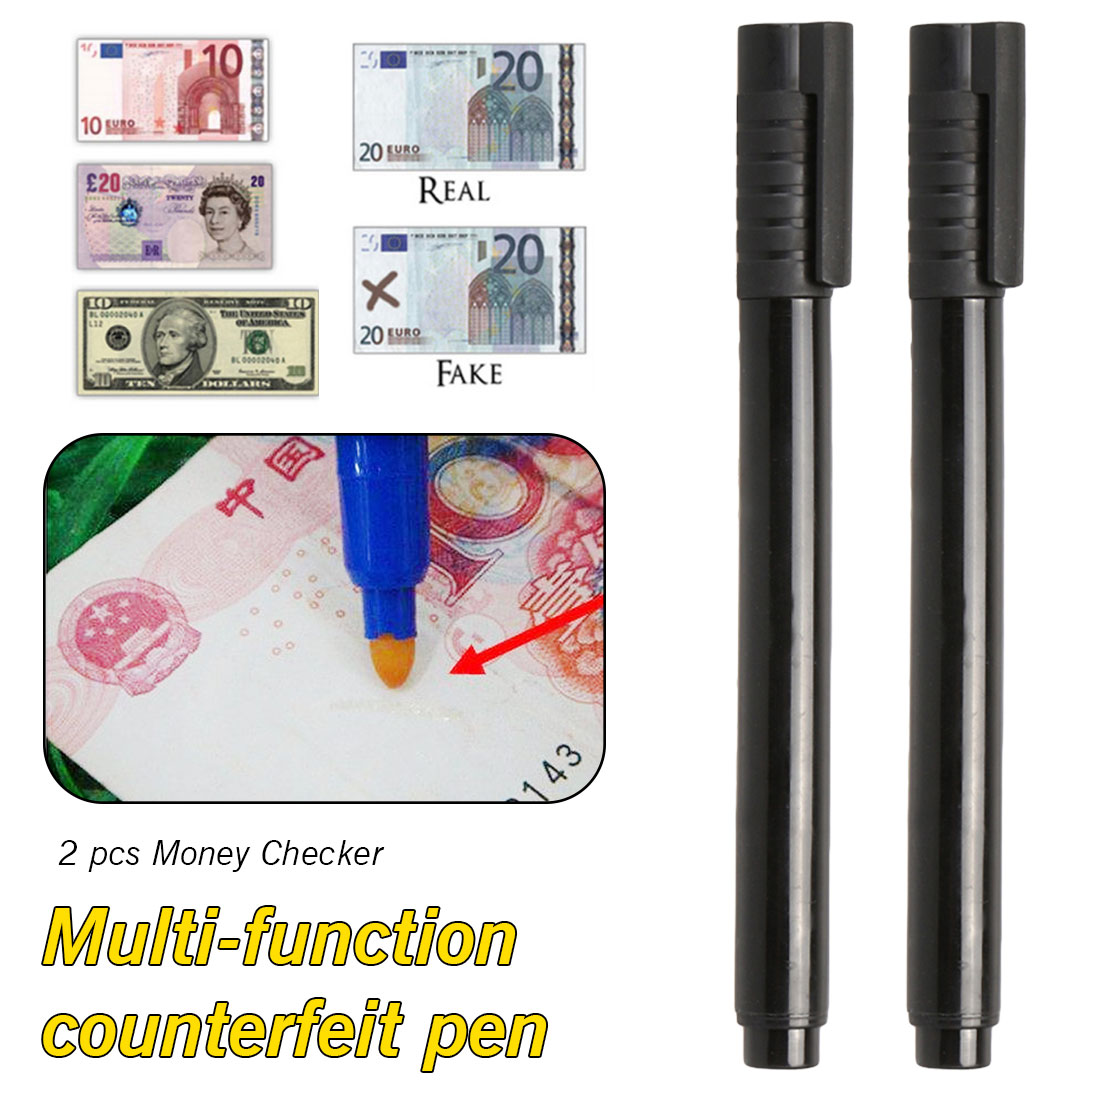 Useful Money Detector Checker 2pcs Currency Detector Counterfeit Marker Fake Banknotes Tester Pen Unique Ink Hand Checkering Too